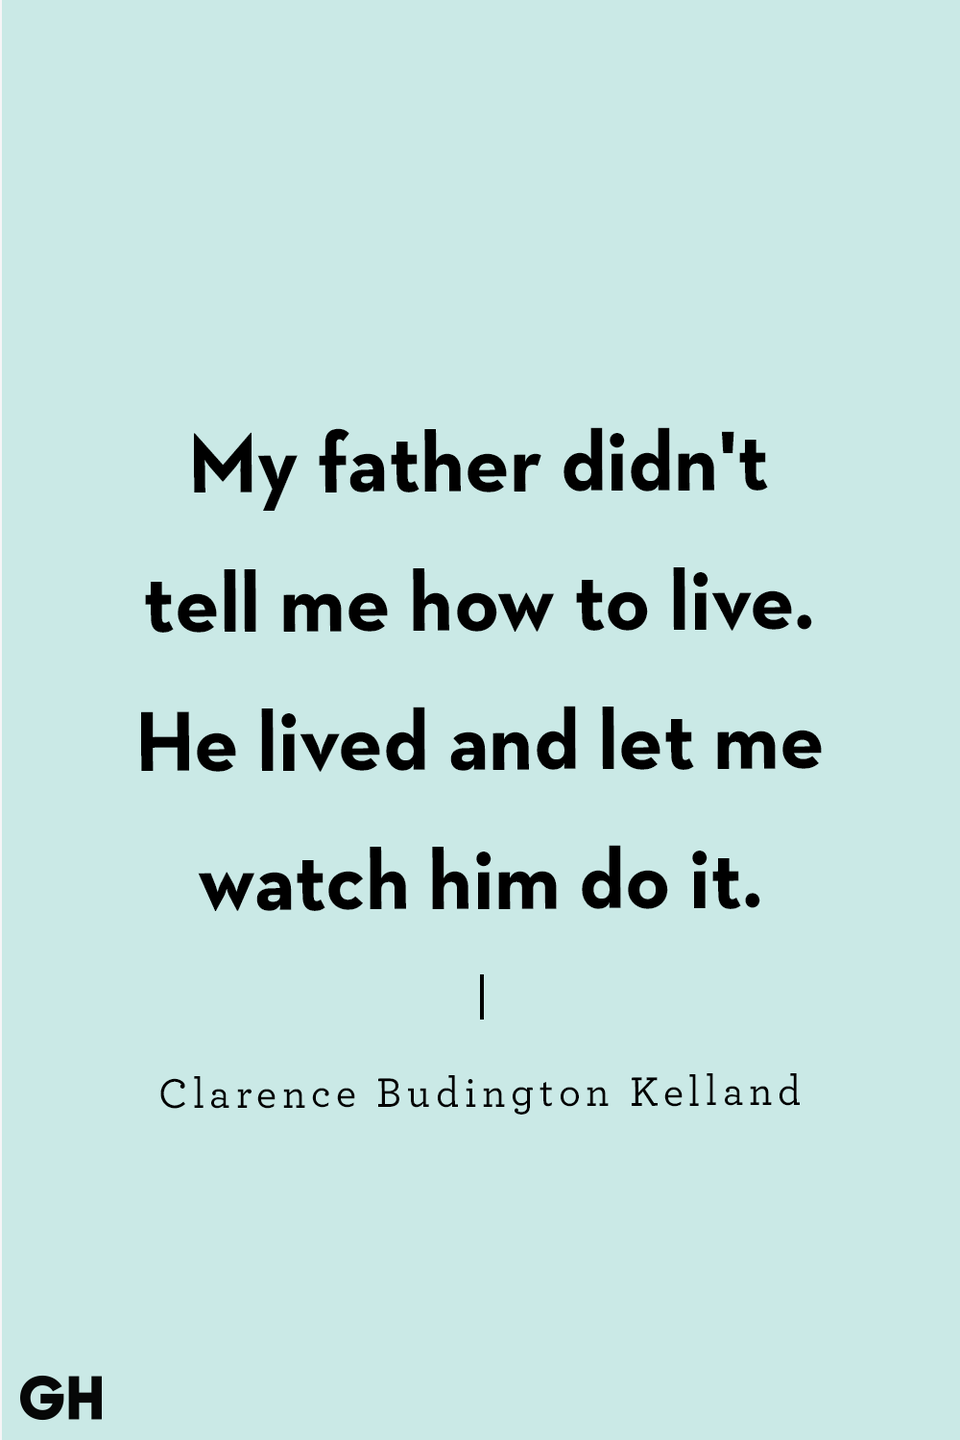 <p>My father didn't tell me how to live. He lived and let me watch him do it.</p>